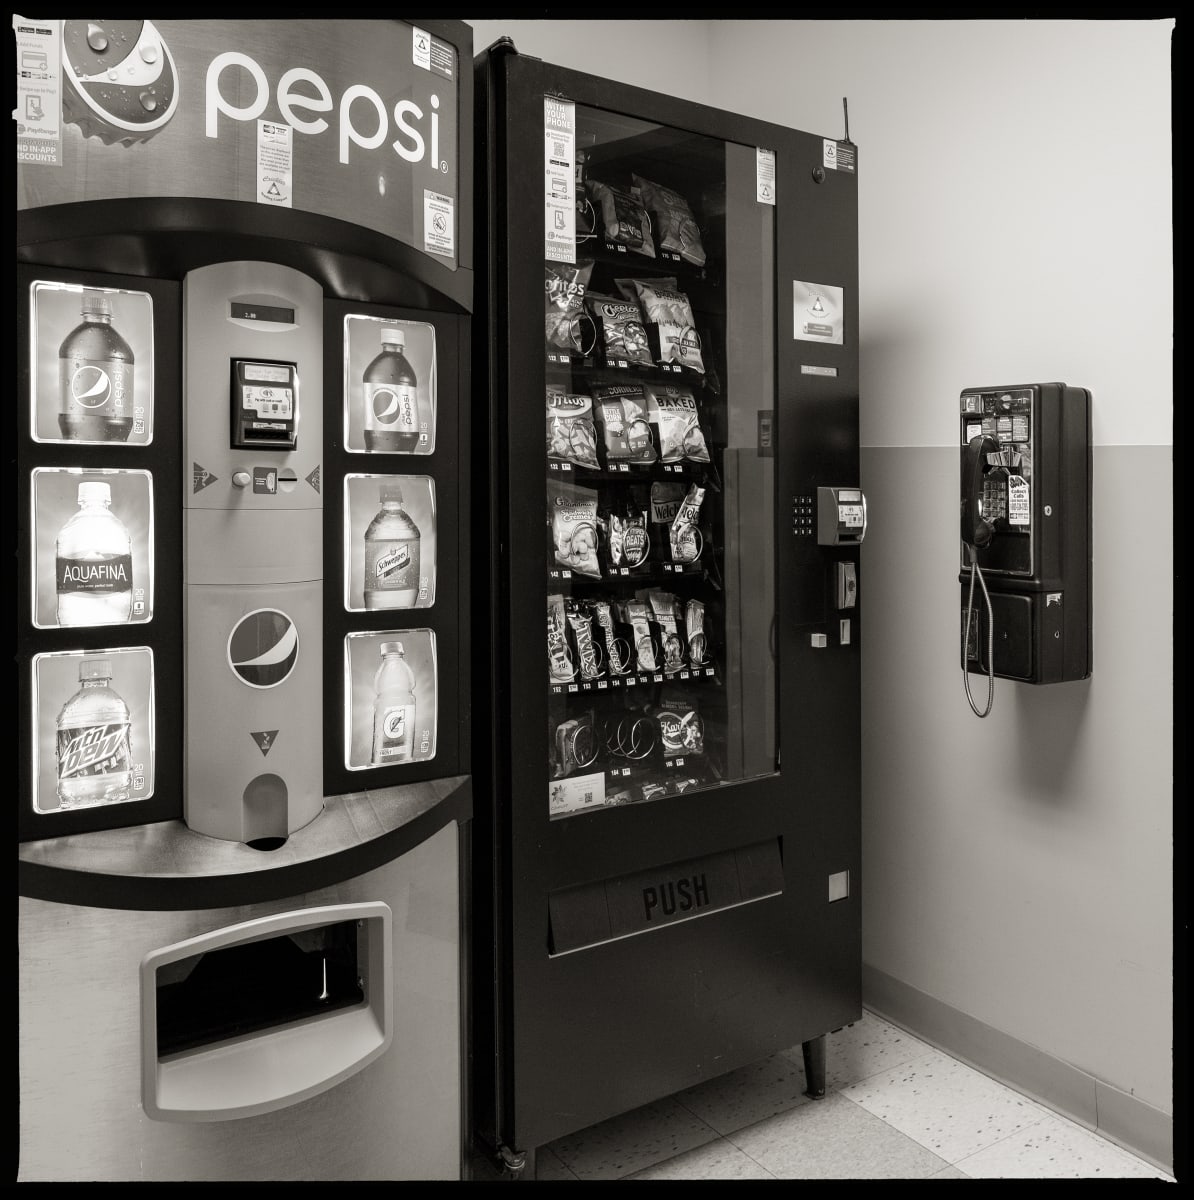 585.266.9430 – RGH Hospital, 1425 Portland Avenue, Rochester, NY 14621 by Eric T. Kunsman  Image: ID: A black and white image shows a wall mounted payphone to the right.  Against the left side wall of the corner are two vending machines- a Pepsi machine and a snack machine.